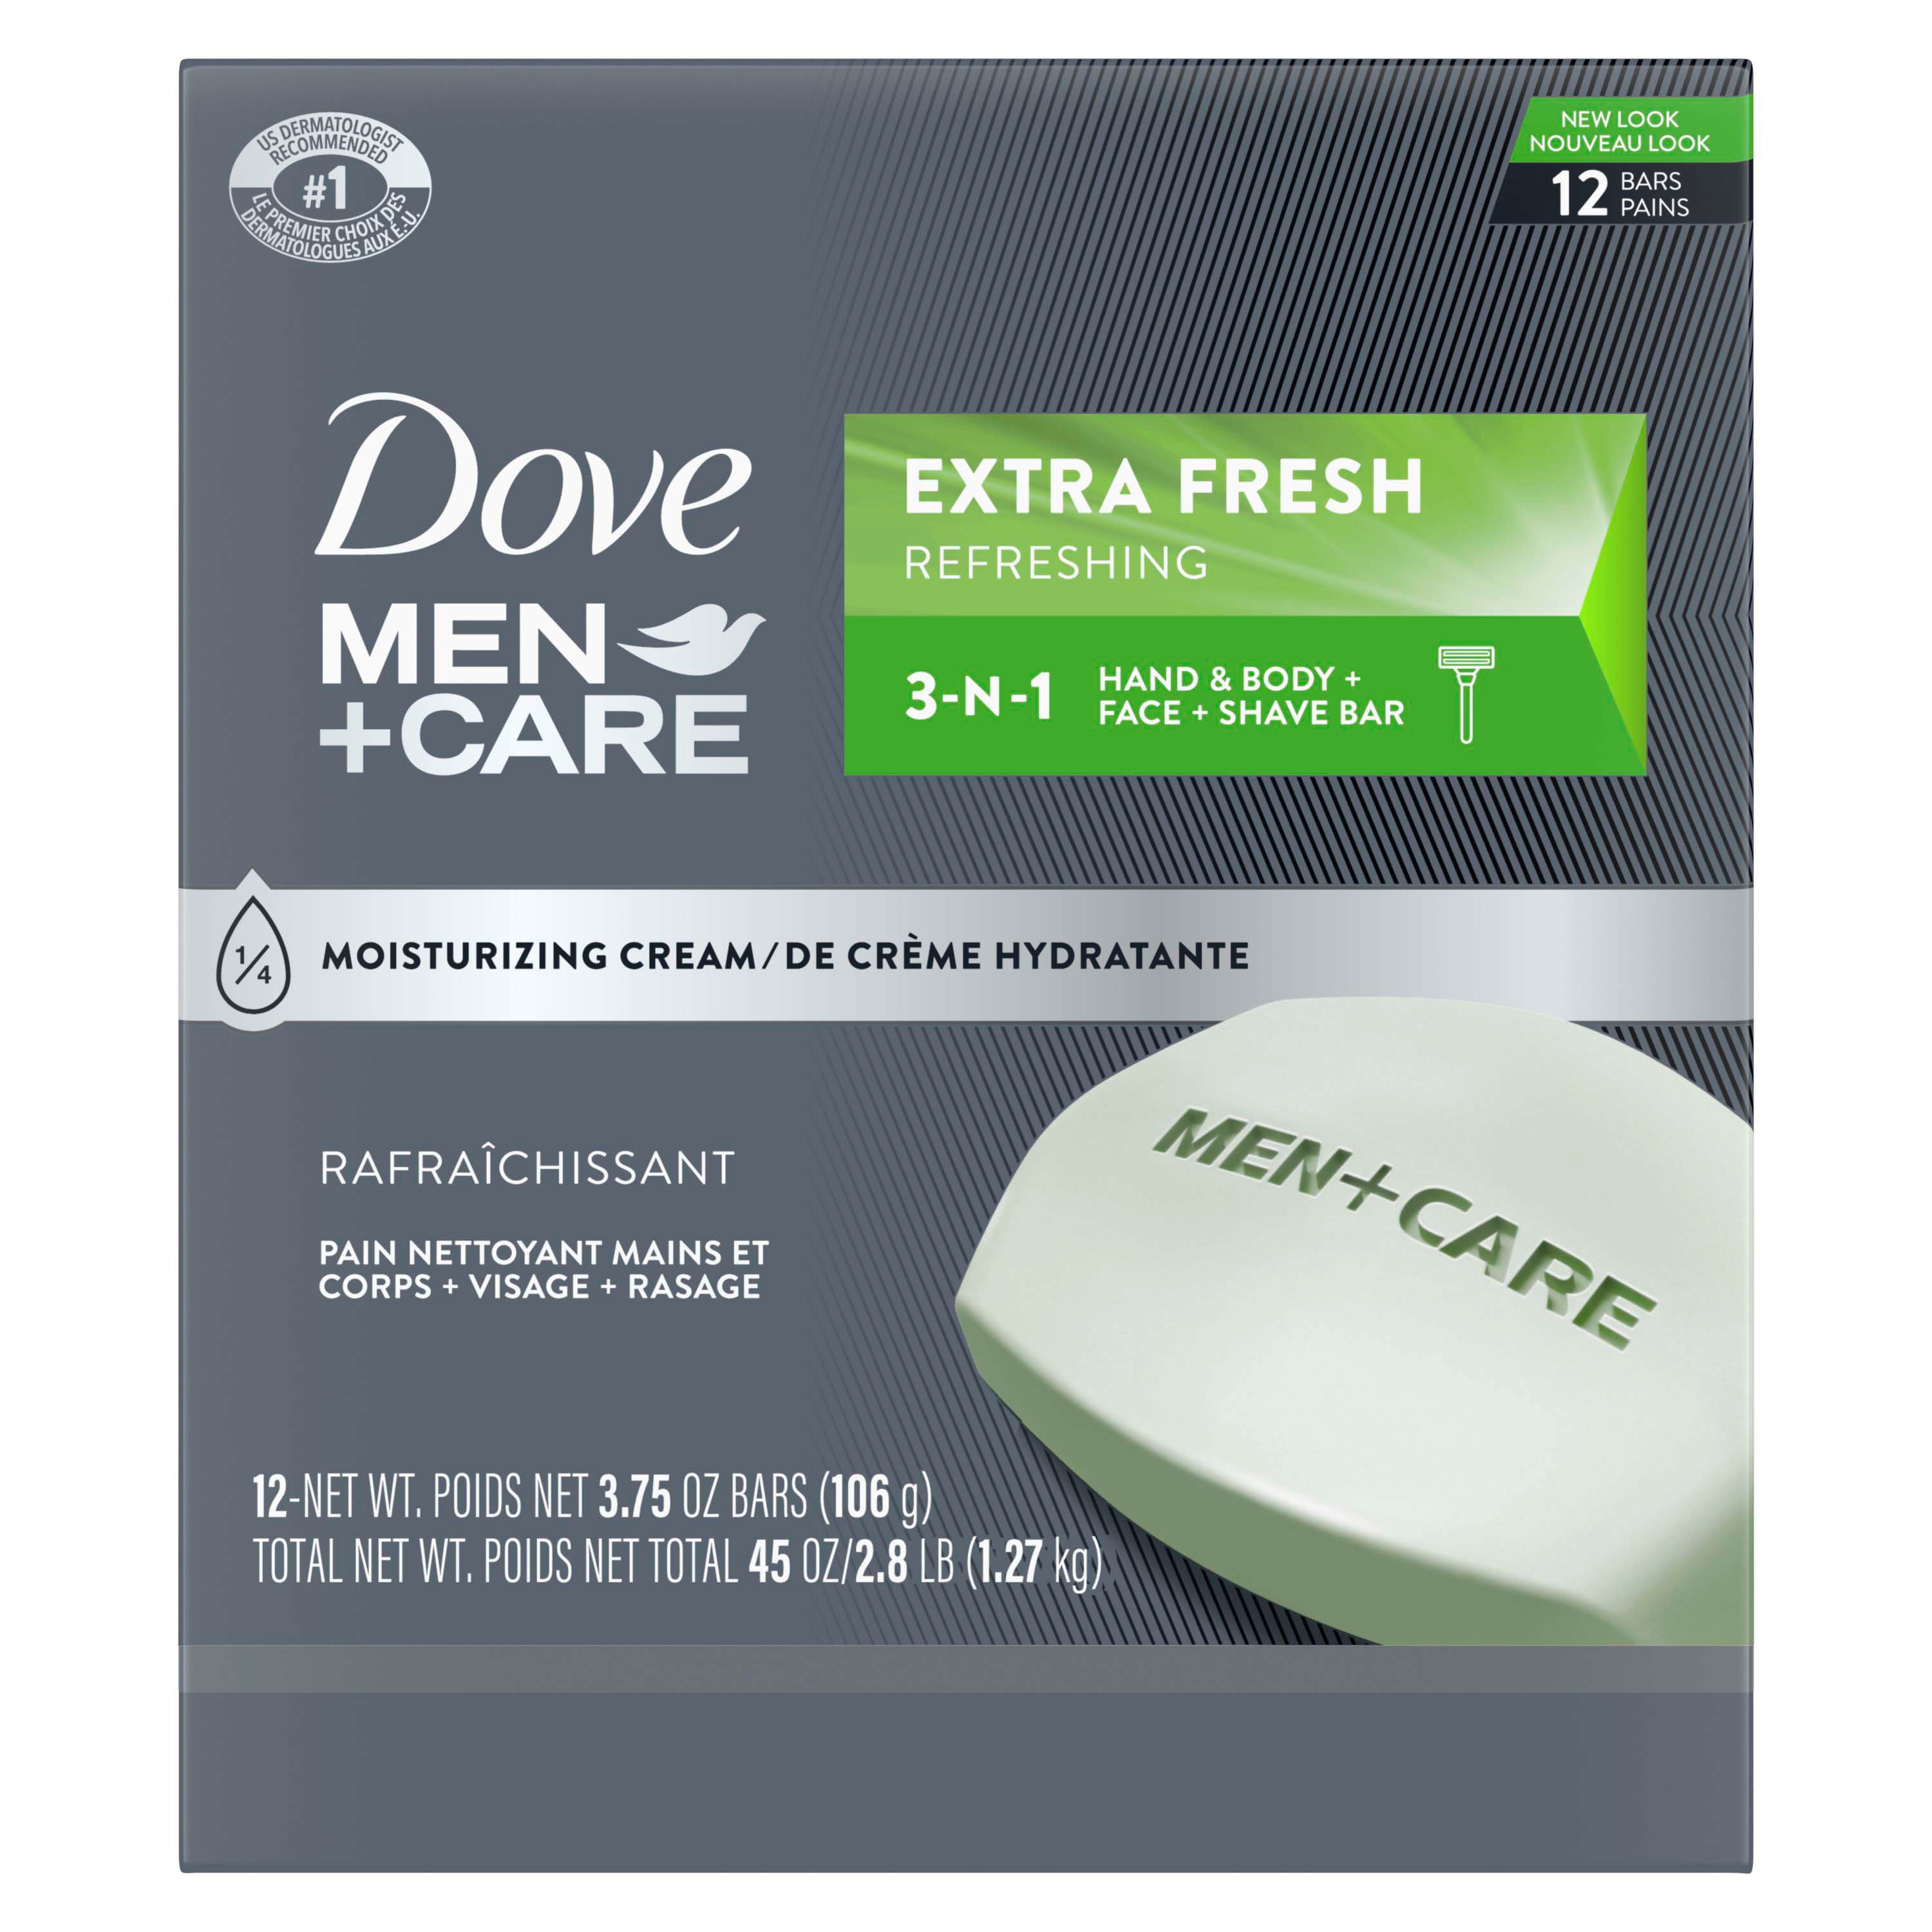 Dove Men+Care 3 in 1 Bar Cleanser for Body, Face, and Shaving Extra Fresh  Body and Facial Cleanser More Moisturizing Than Bar Soap to Clean and  Hydrate Skin 3.75 Ounce (Pack of